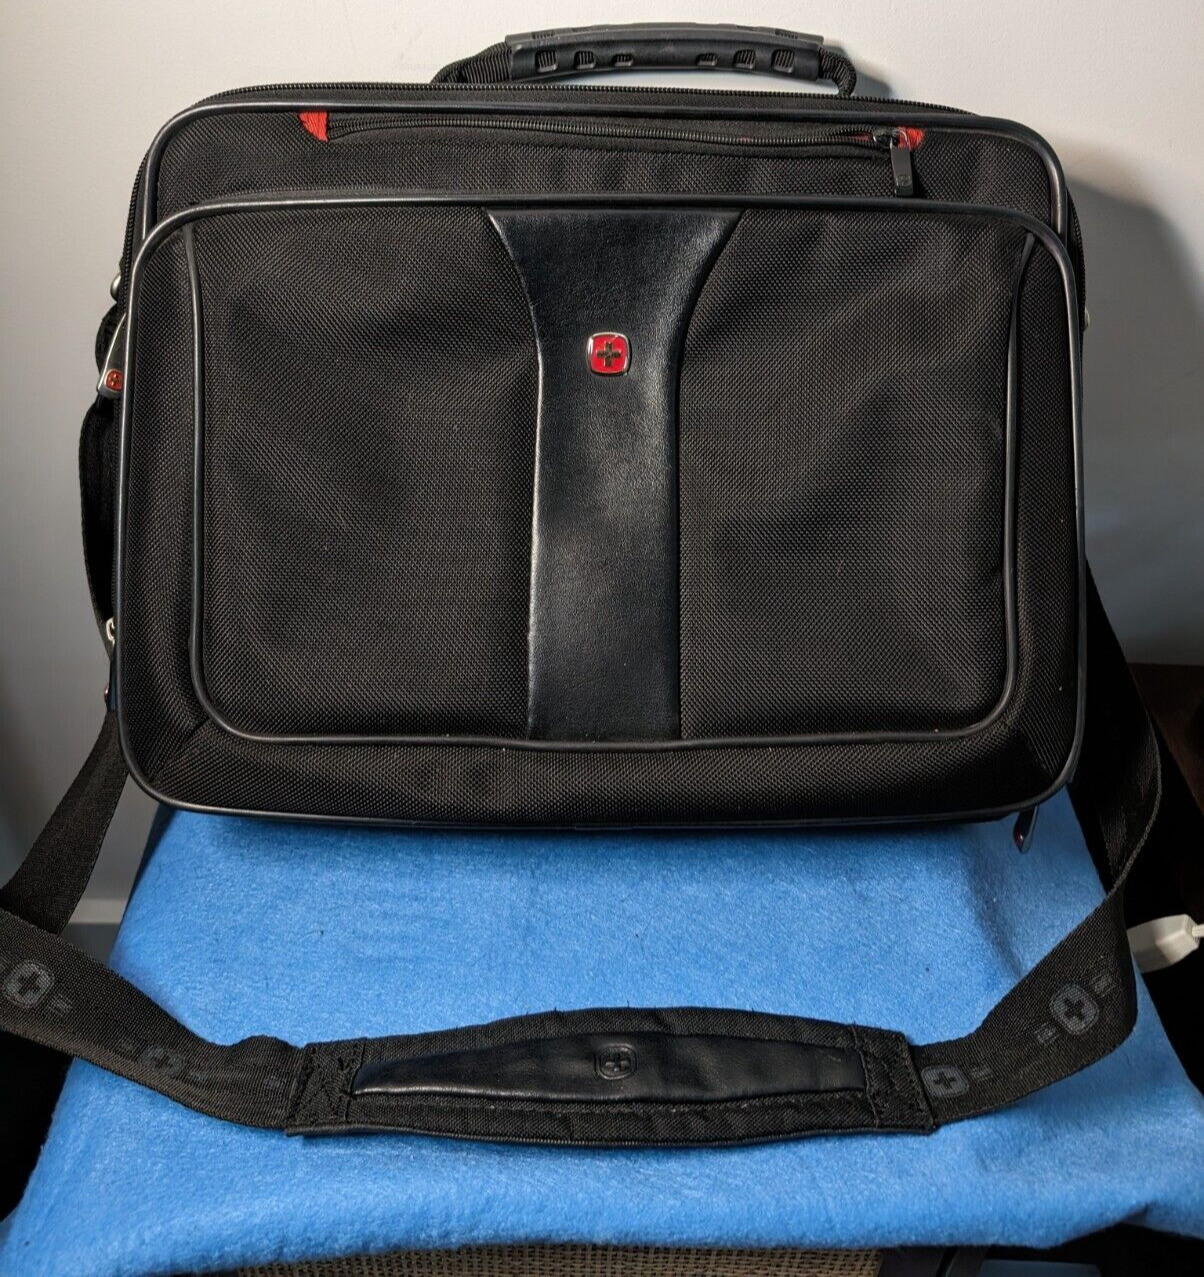 Wenger Swiss Gear Computer Laptop Tablet Carrying Black Briefcase Travel Bag